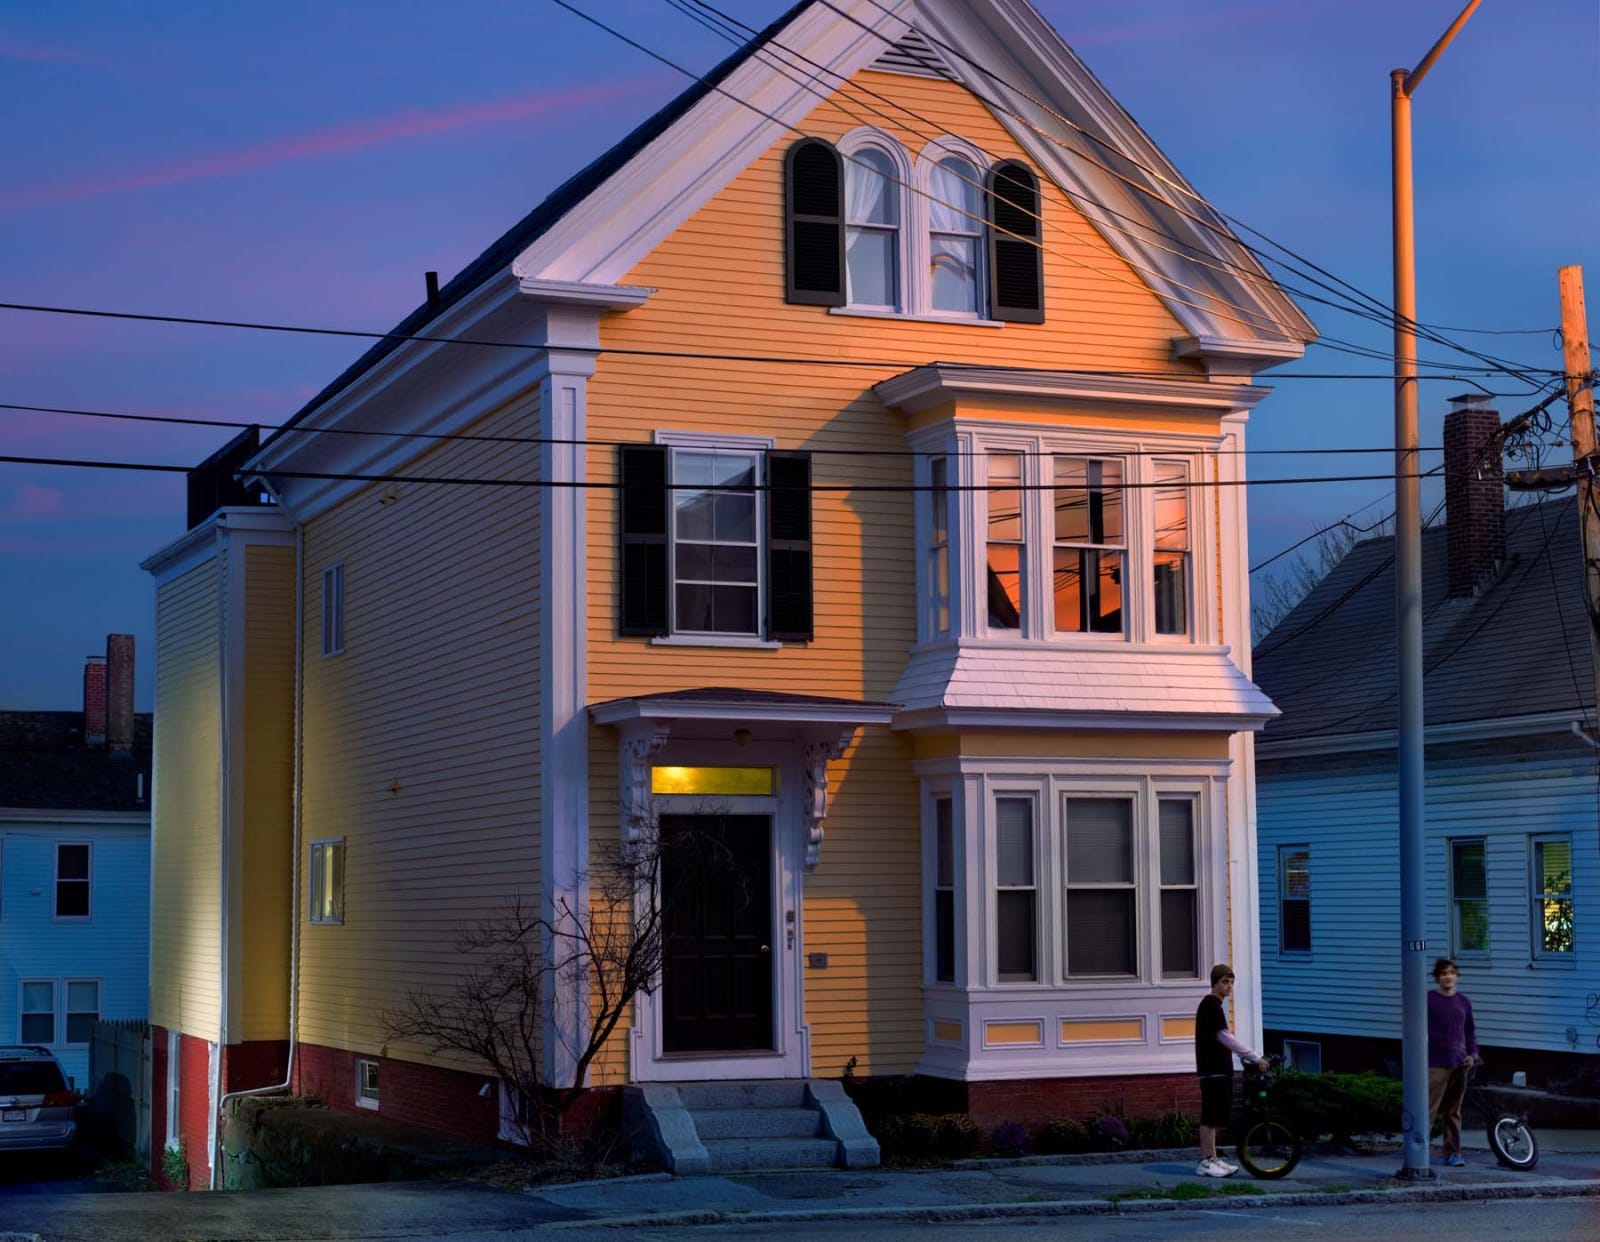 Gail Albert Halaban Anderson's House Edward Hopper house redux revisited architecture Gloucester